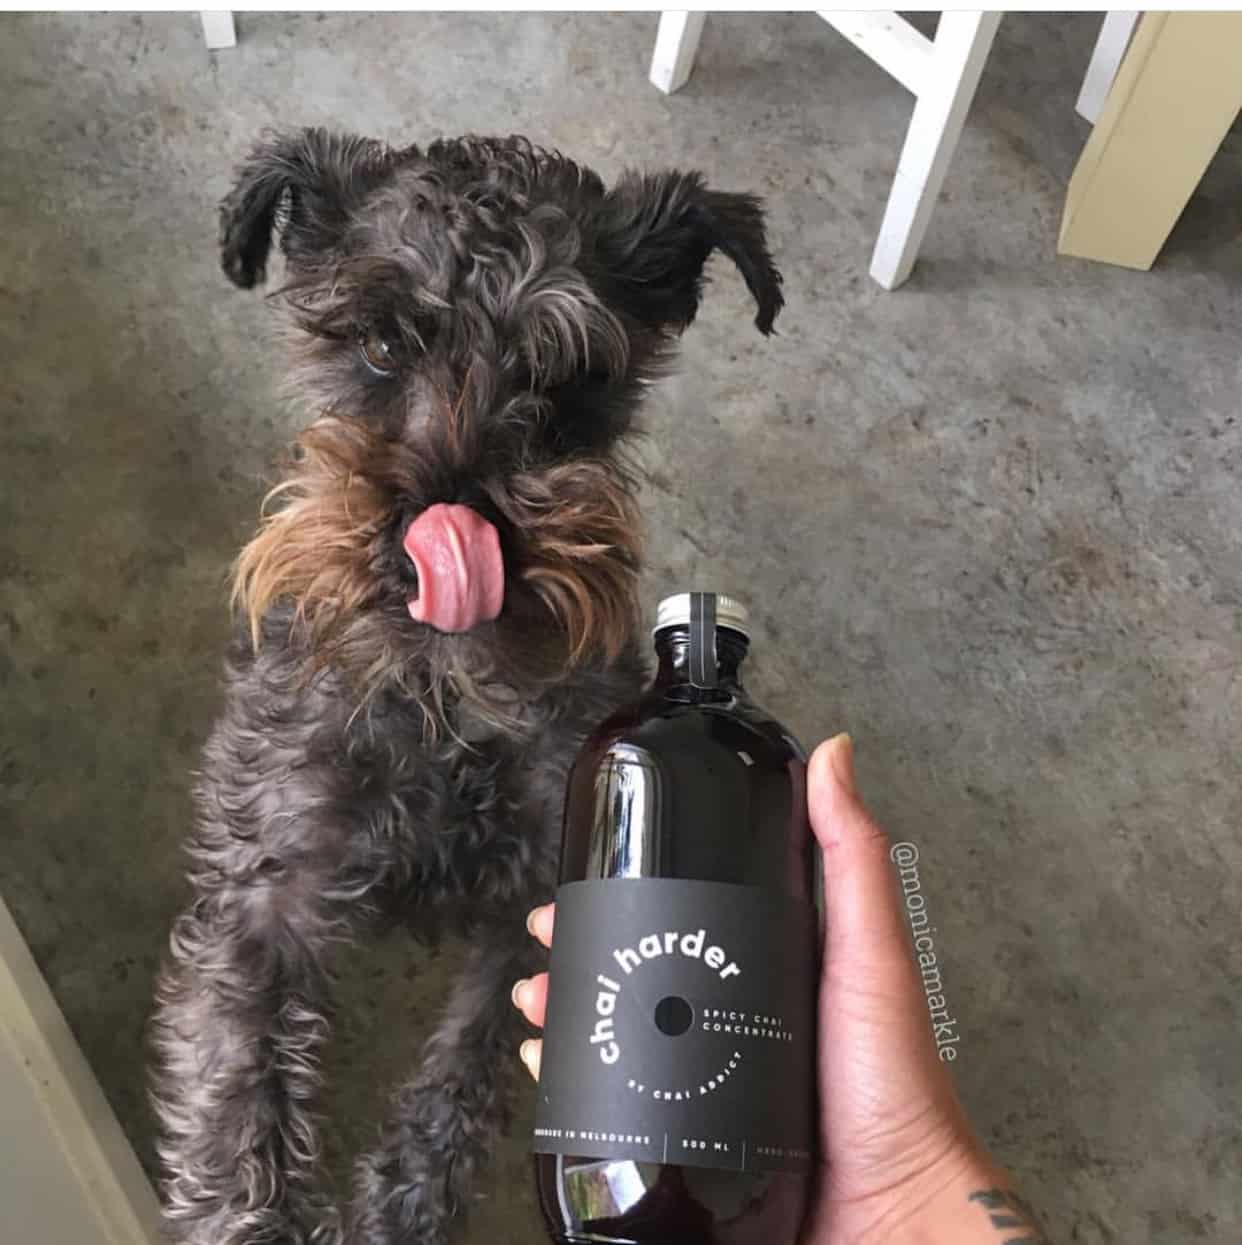 hand holding chai harder chai latte concentrate while dog lick its nose